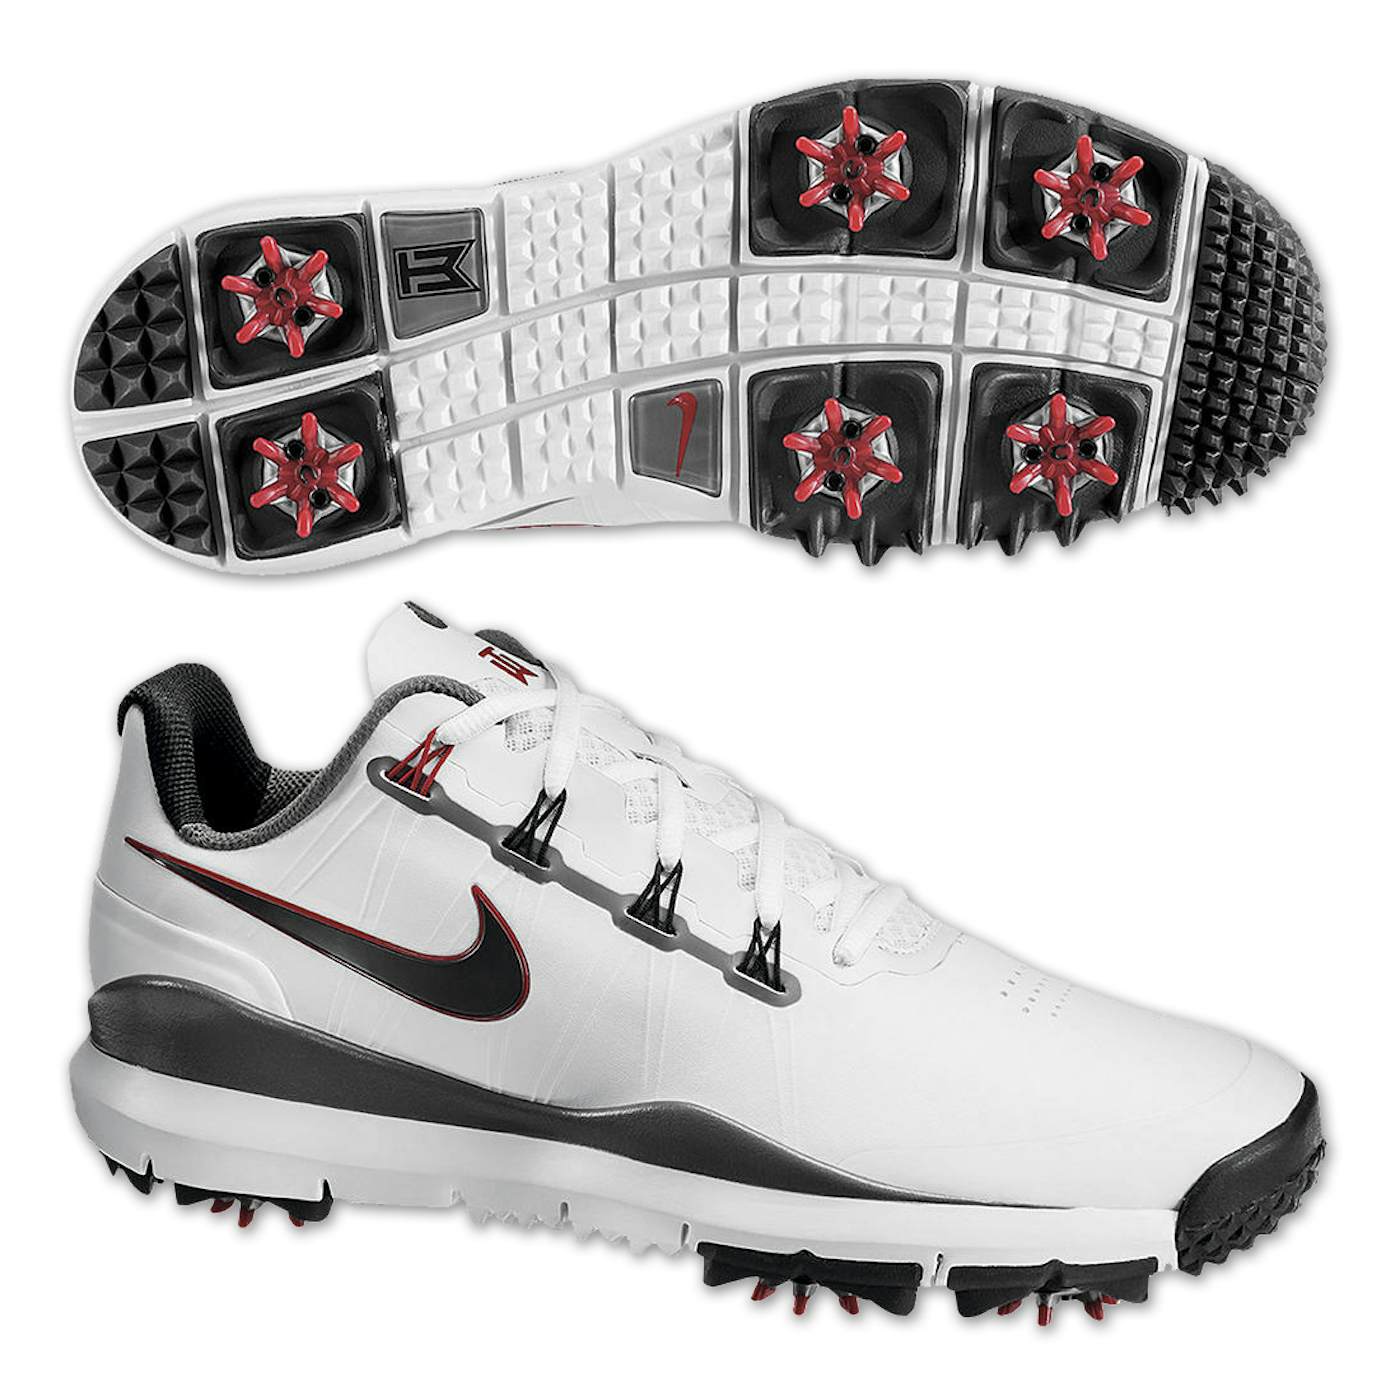 Tiger Woods 2014 Nike Golf Shoes: White